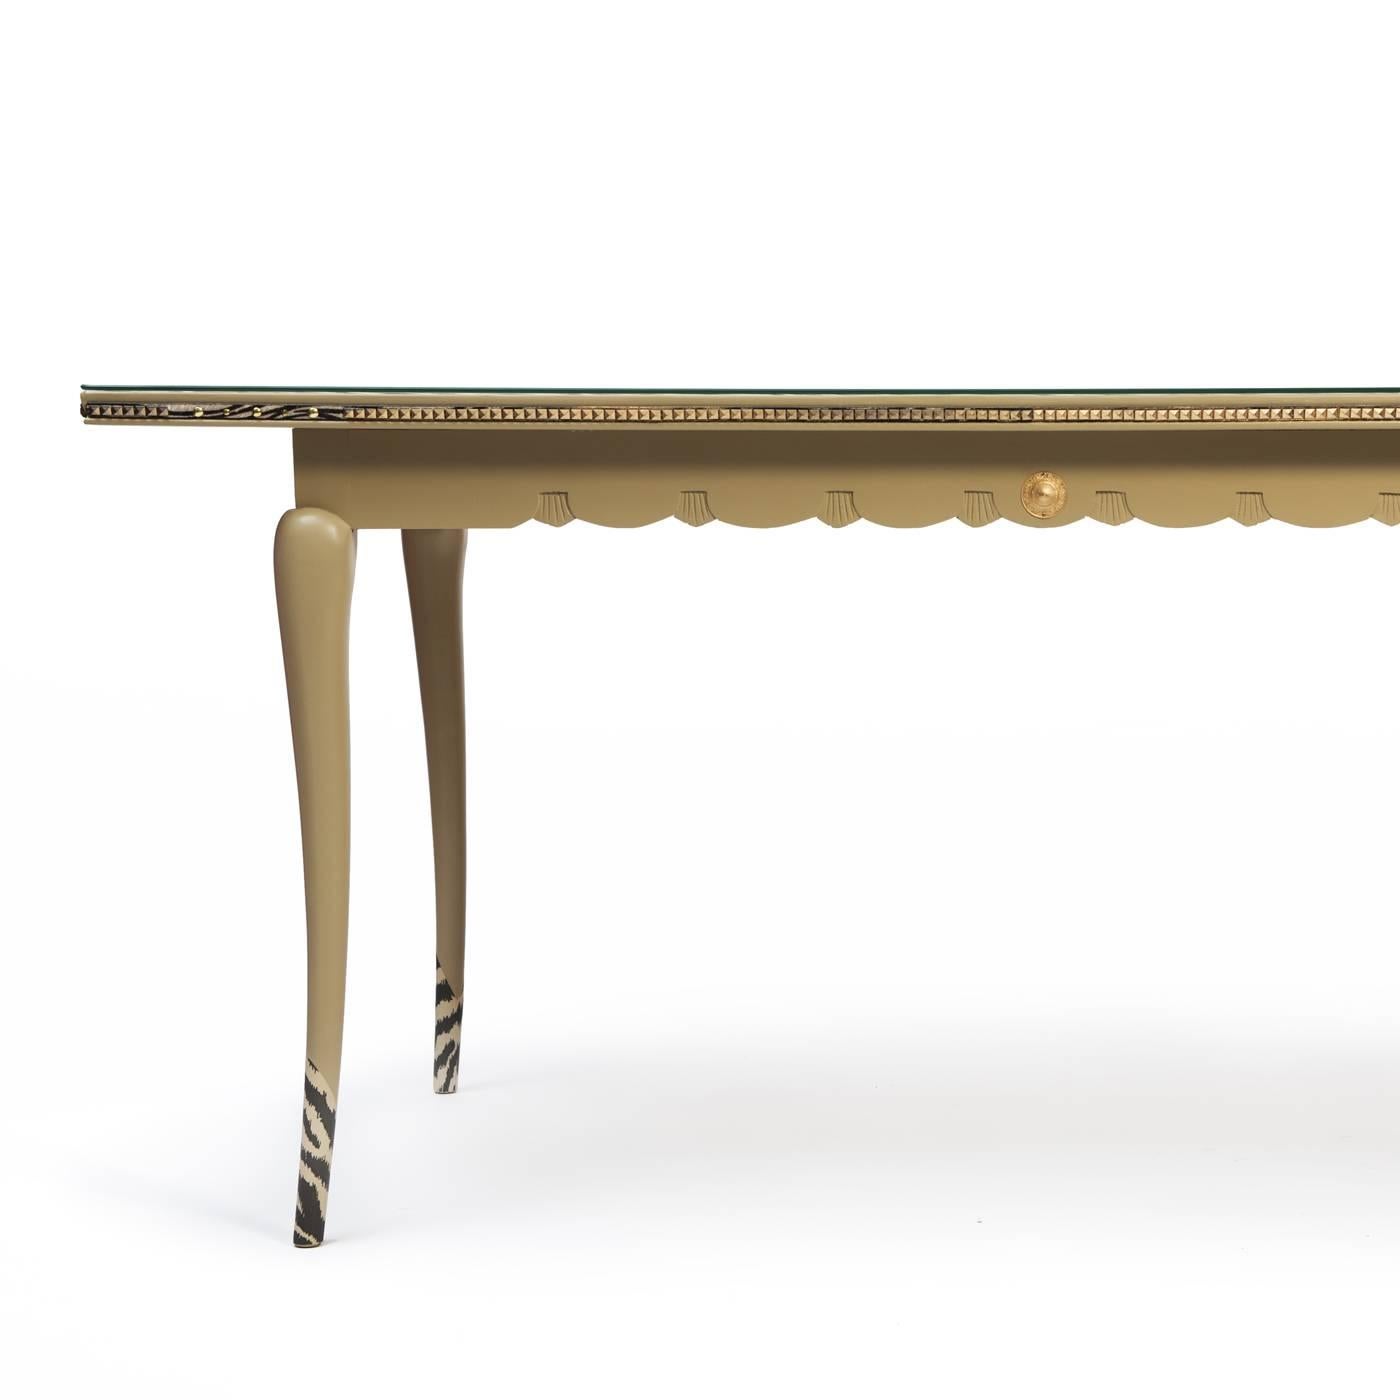 This sophisticated table in wood with a sand lacquer finish can also double as a desk and its delicate Silhouette with slightly curved legs will be a unique addition to any decor. The tips of the slender legs are adorned with zebra patterns, while